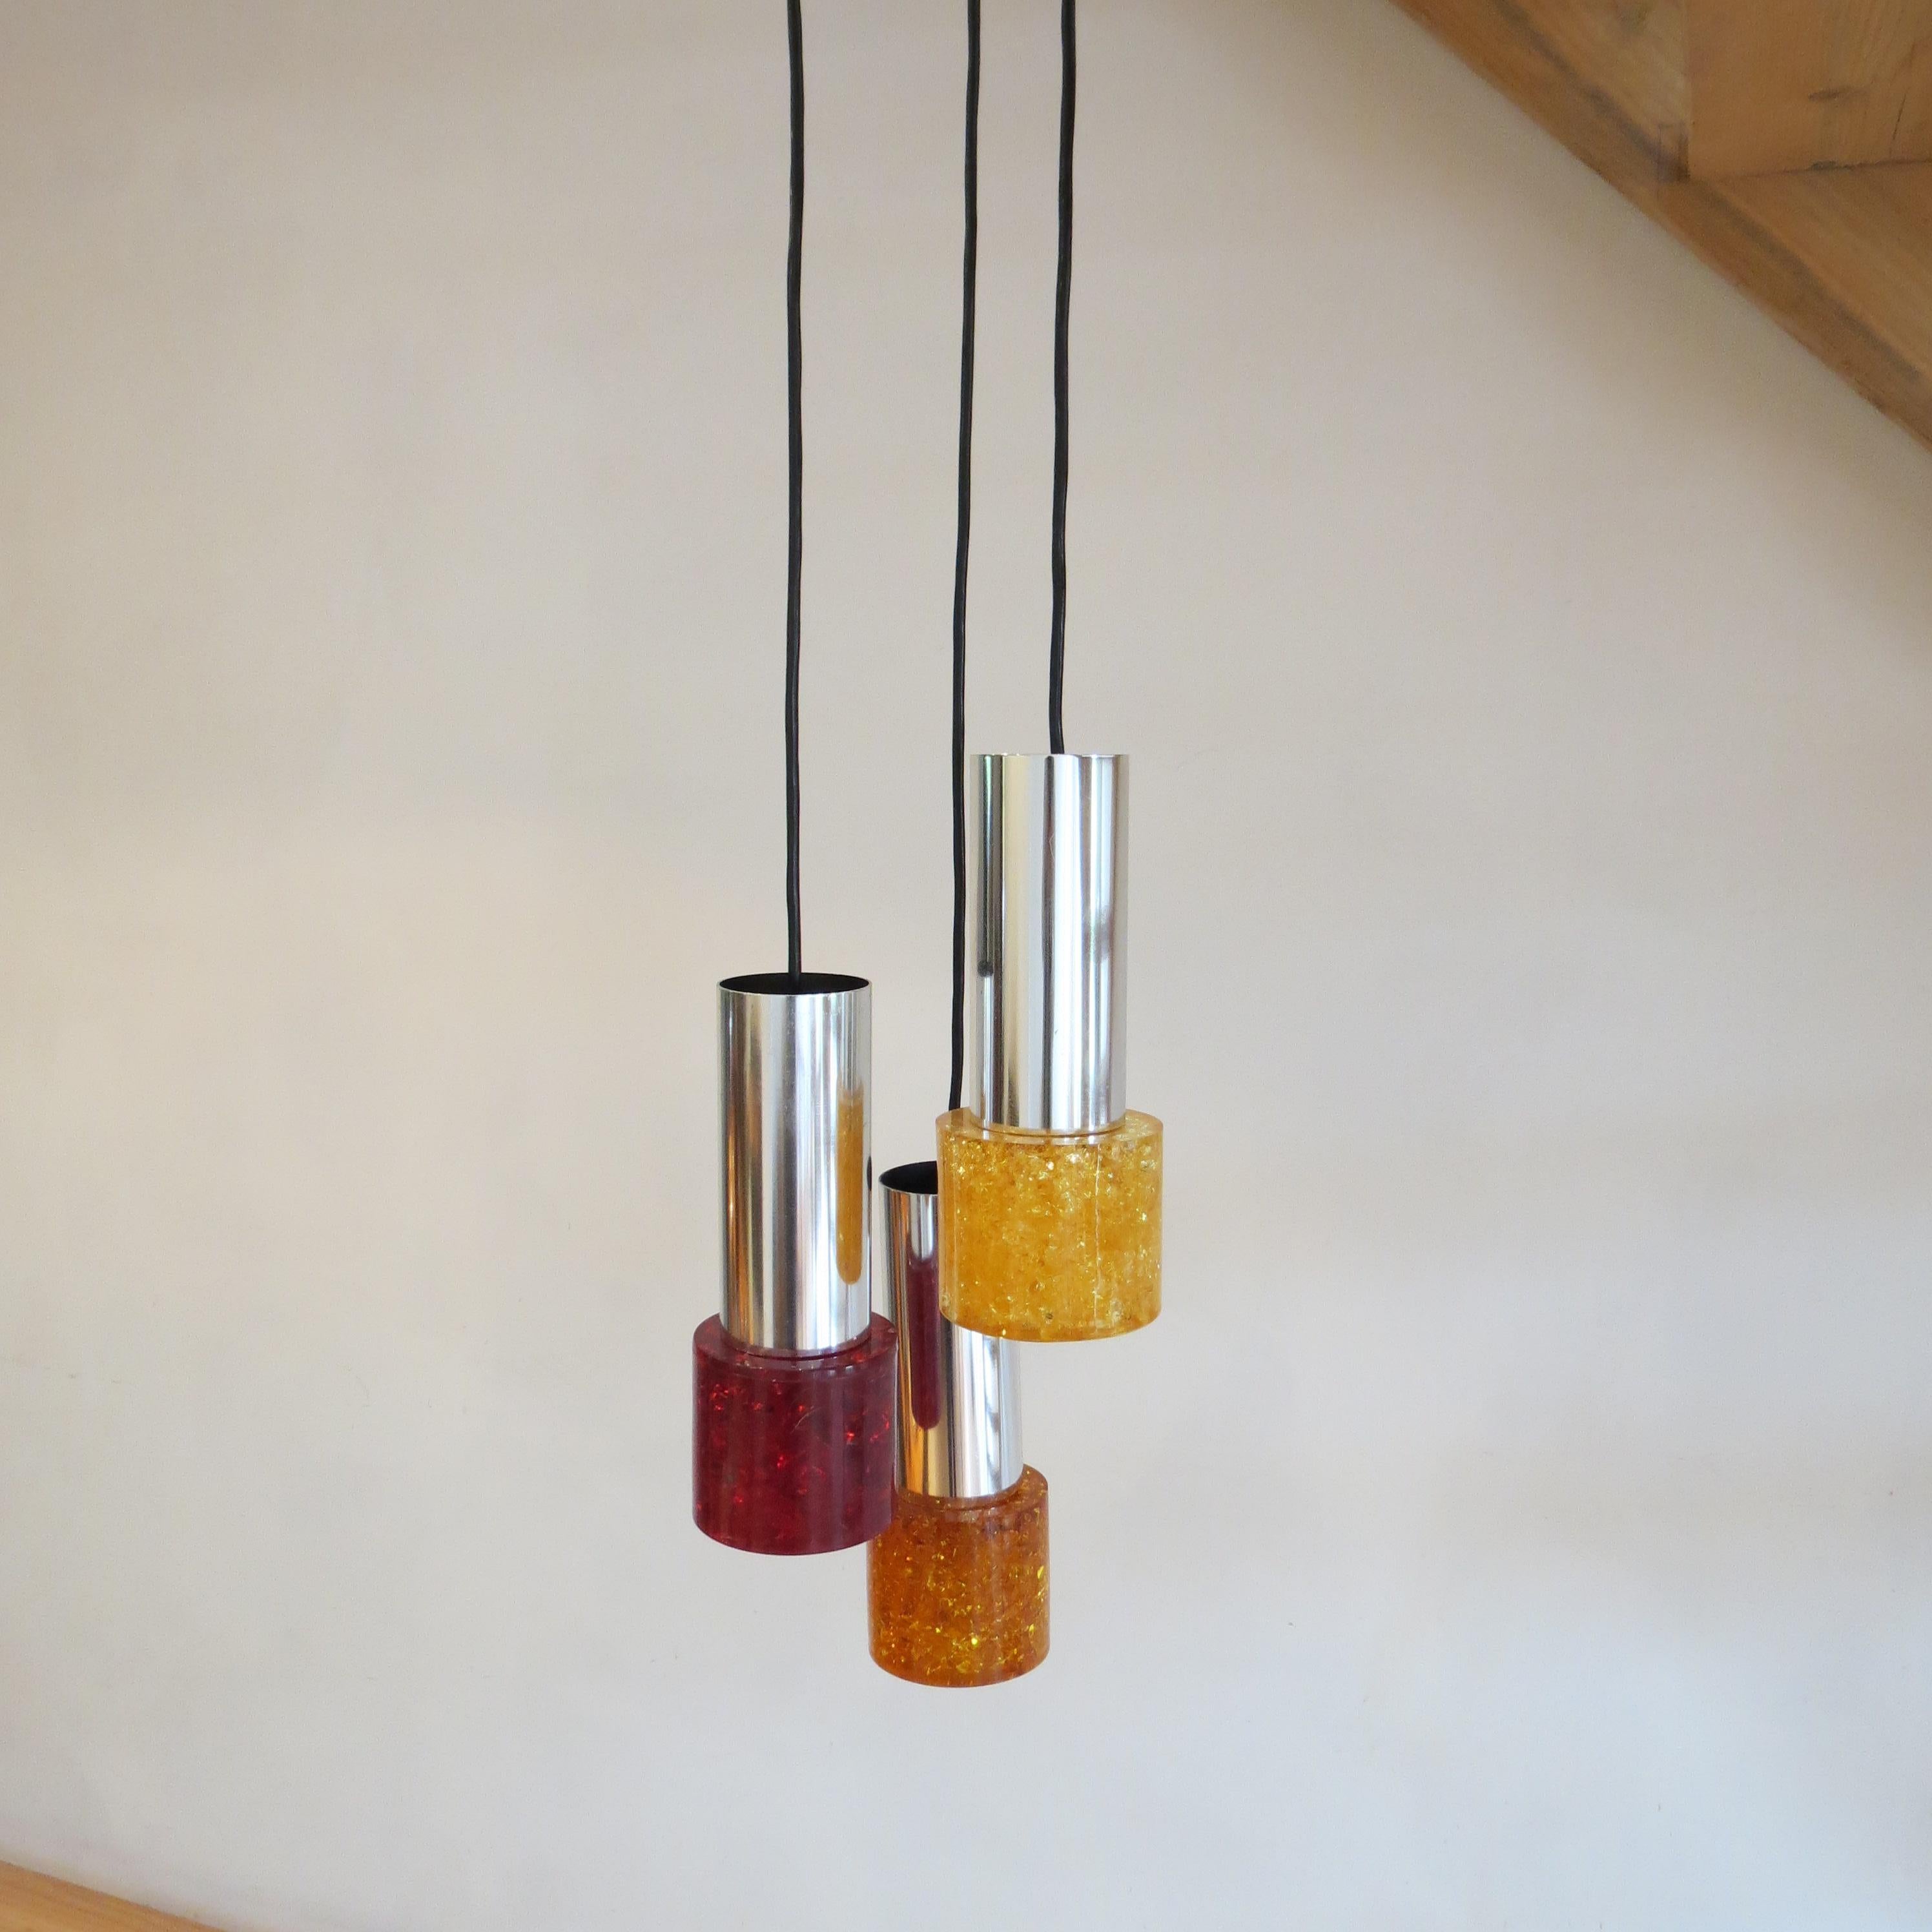 Machine-Made 1970s Cracked Resin Ceiling Hanging Pendant Light Chrome and Shatterline